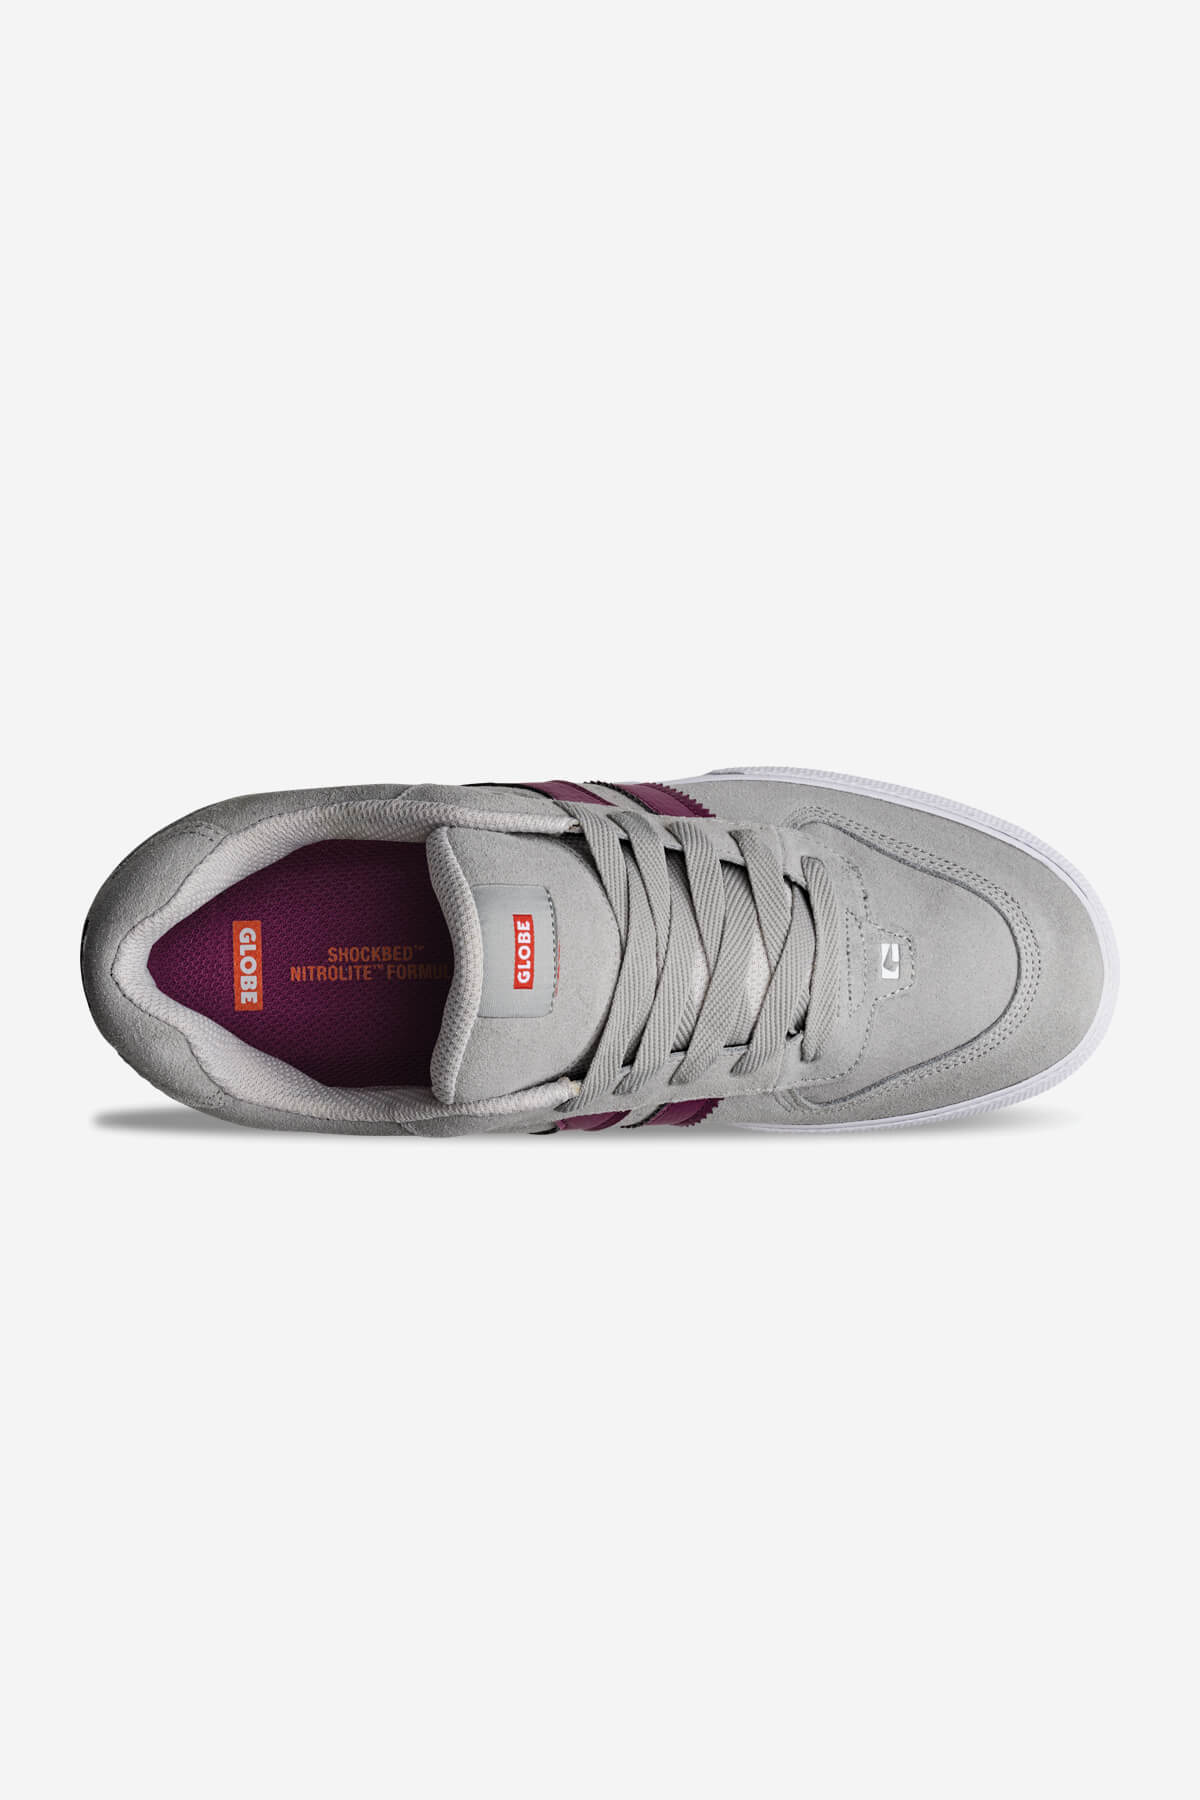 Globe Low shoes Encore-2 skate shoes in Grey/Burgundy